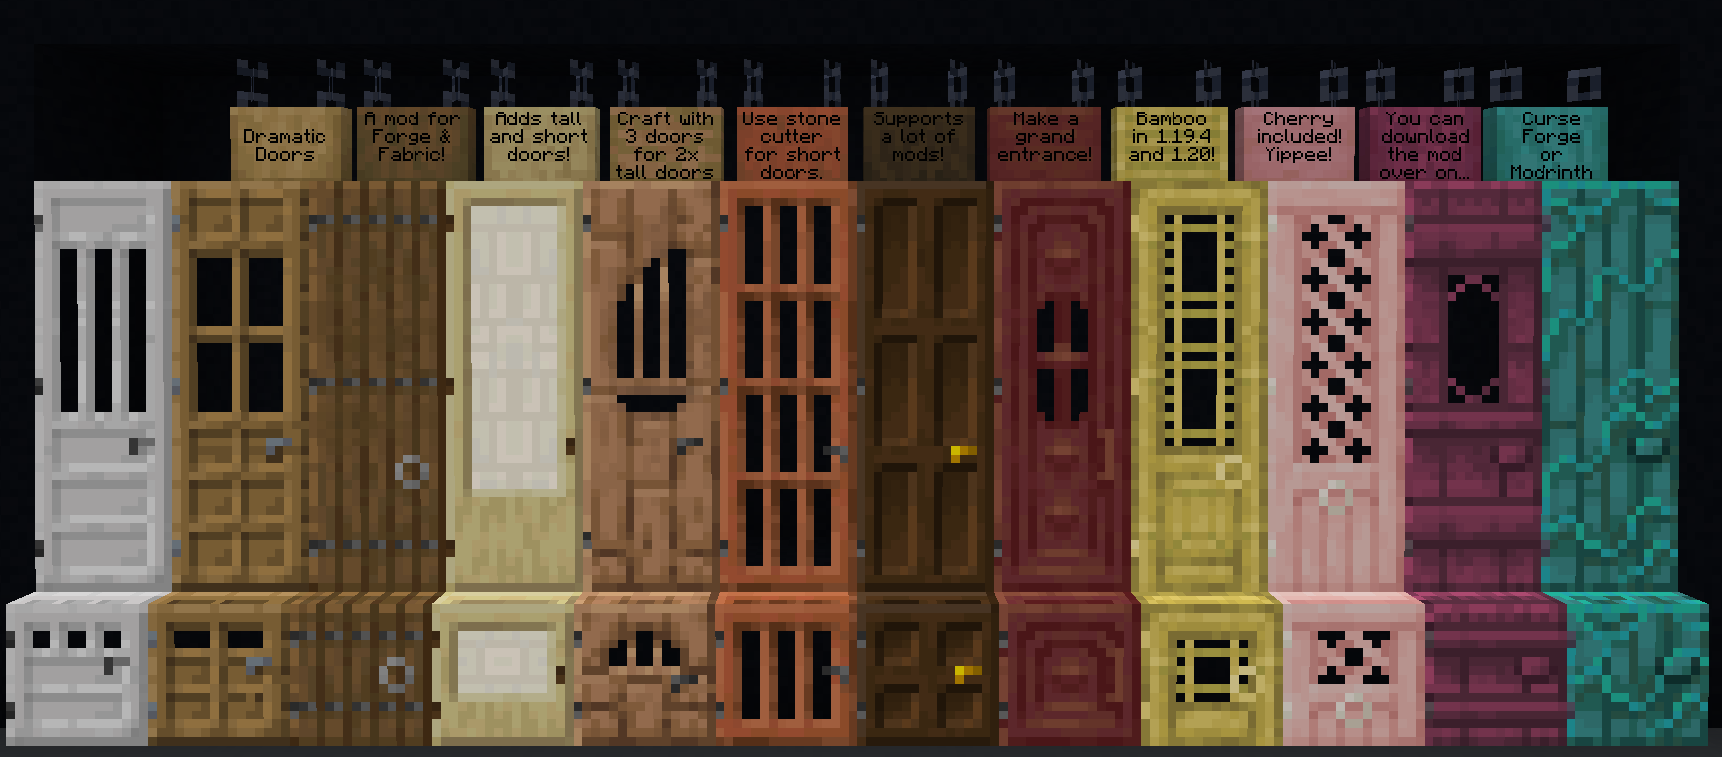 Dramatic Doors Overview